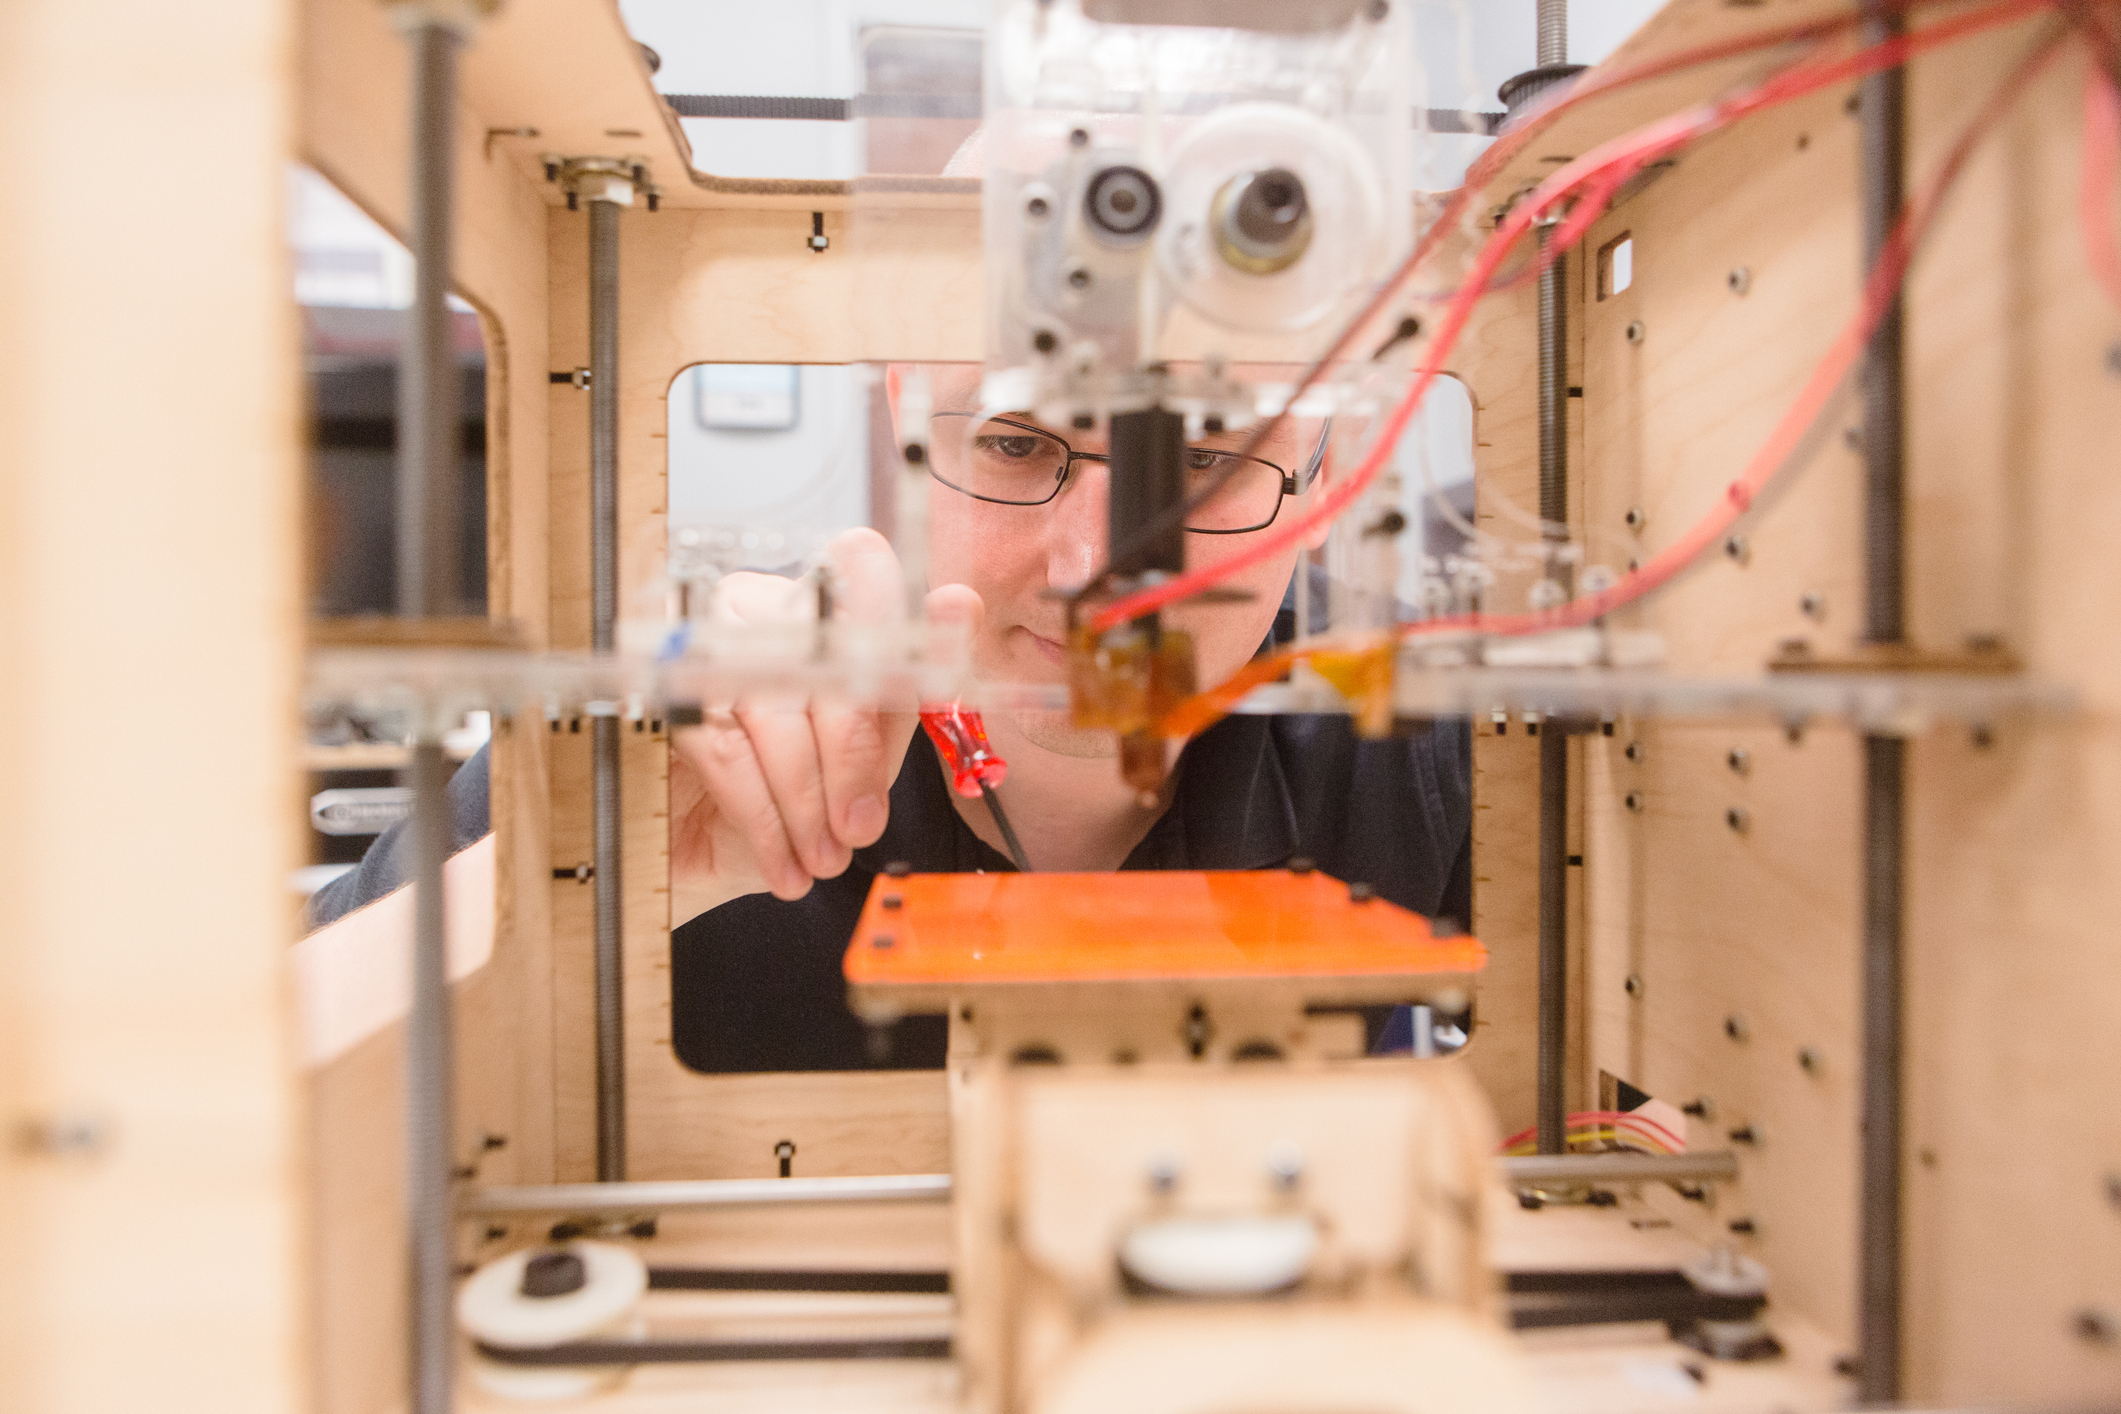 Printing 3D Construction: Using 3D Printers for Building & Architecture